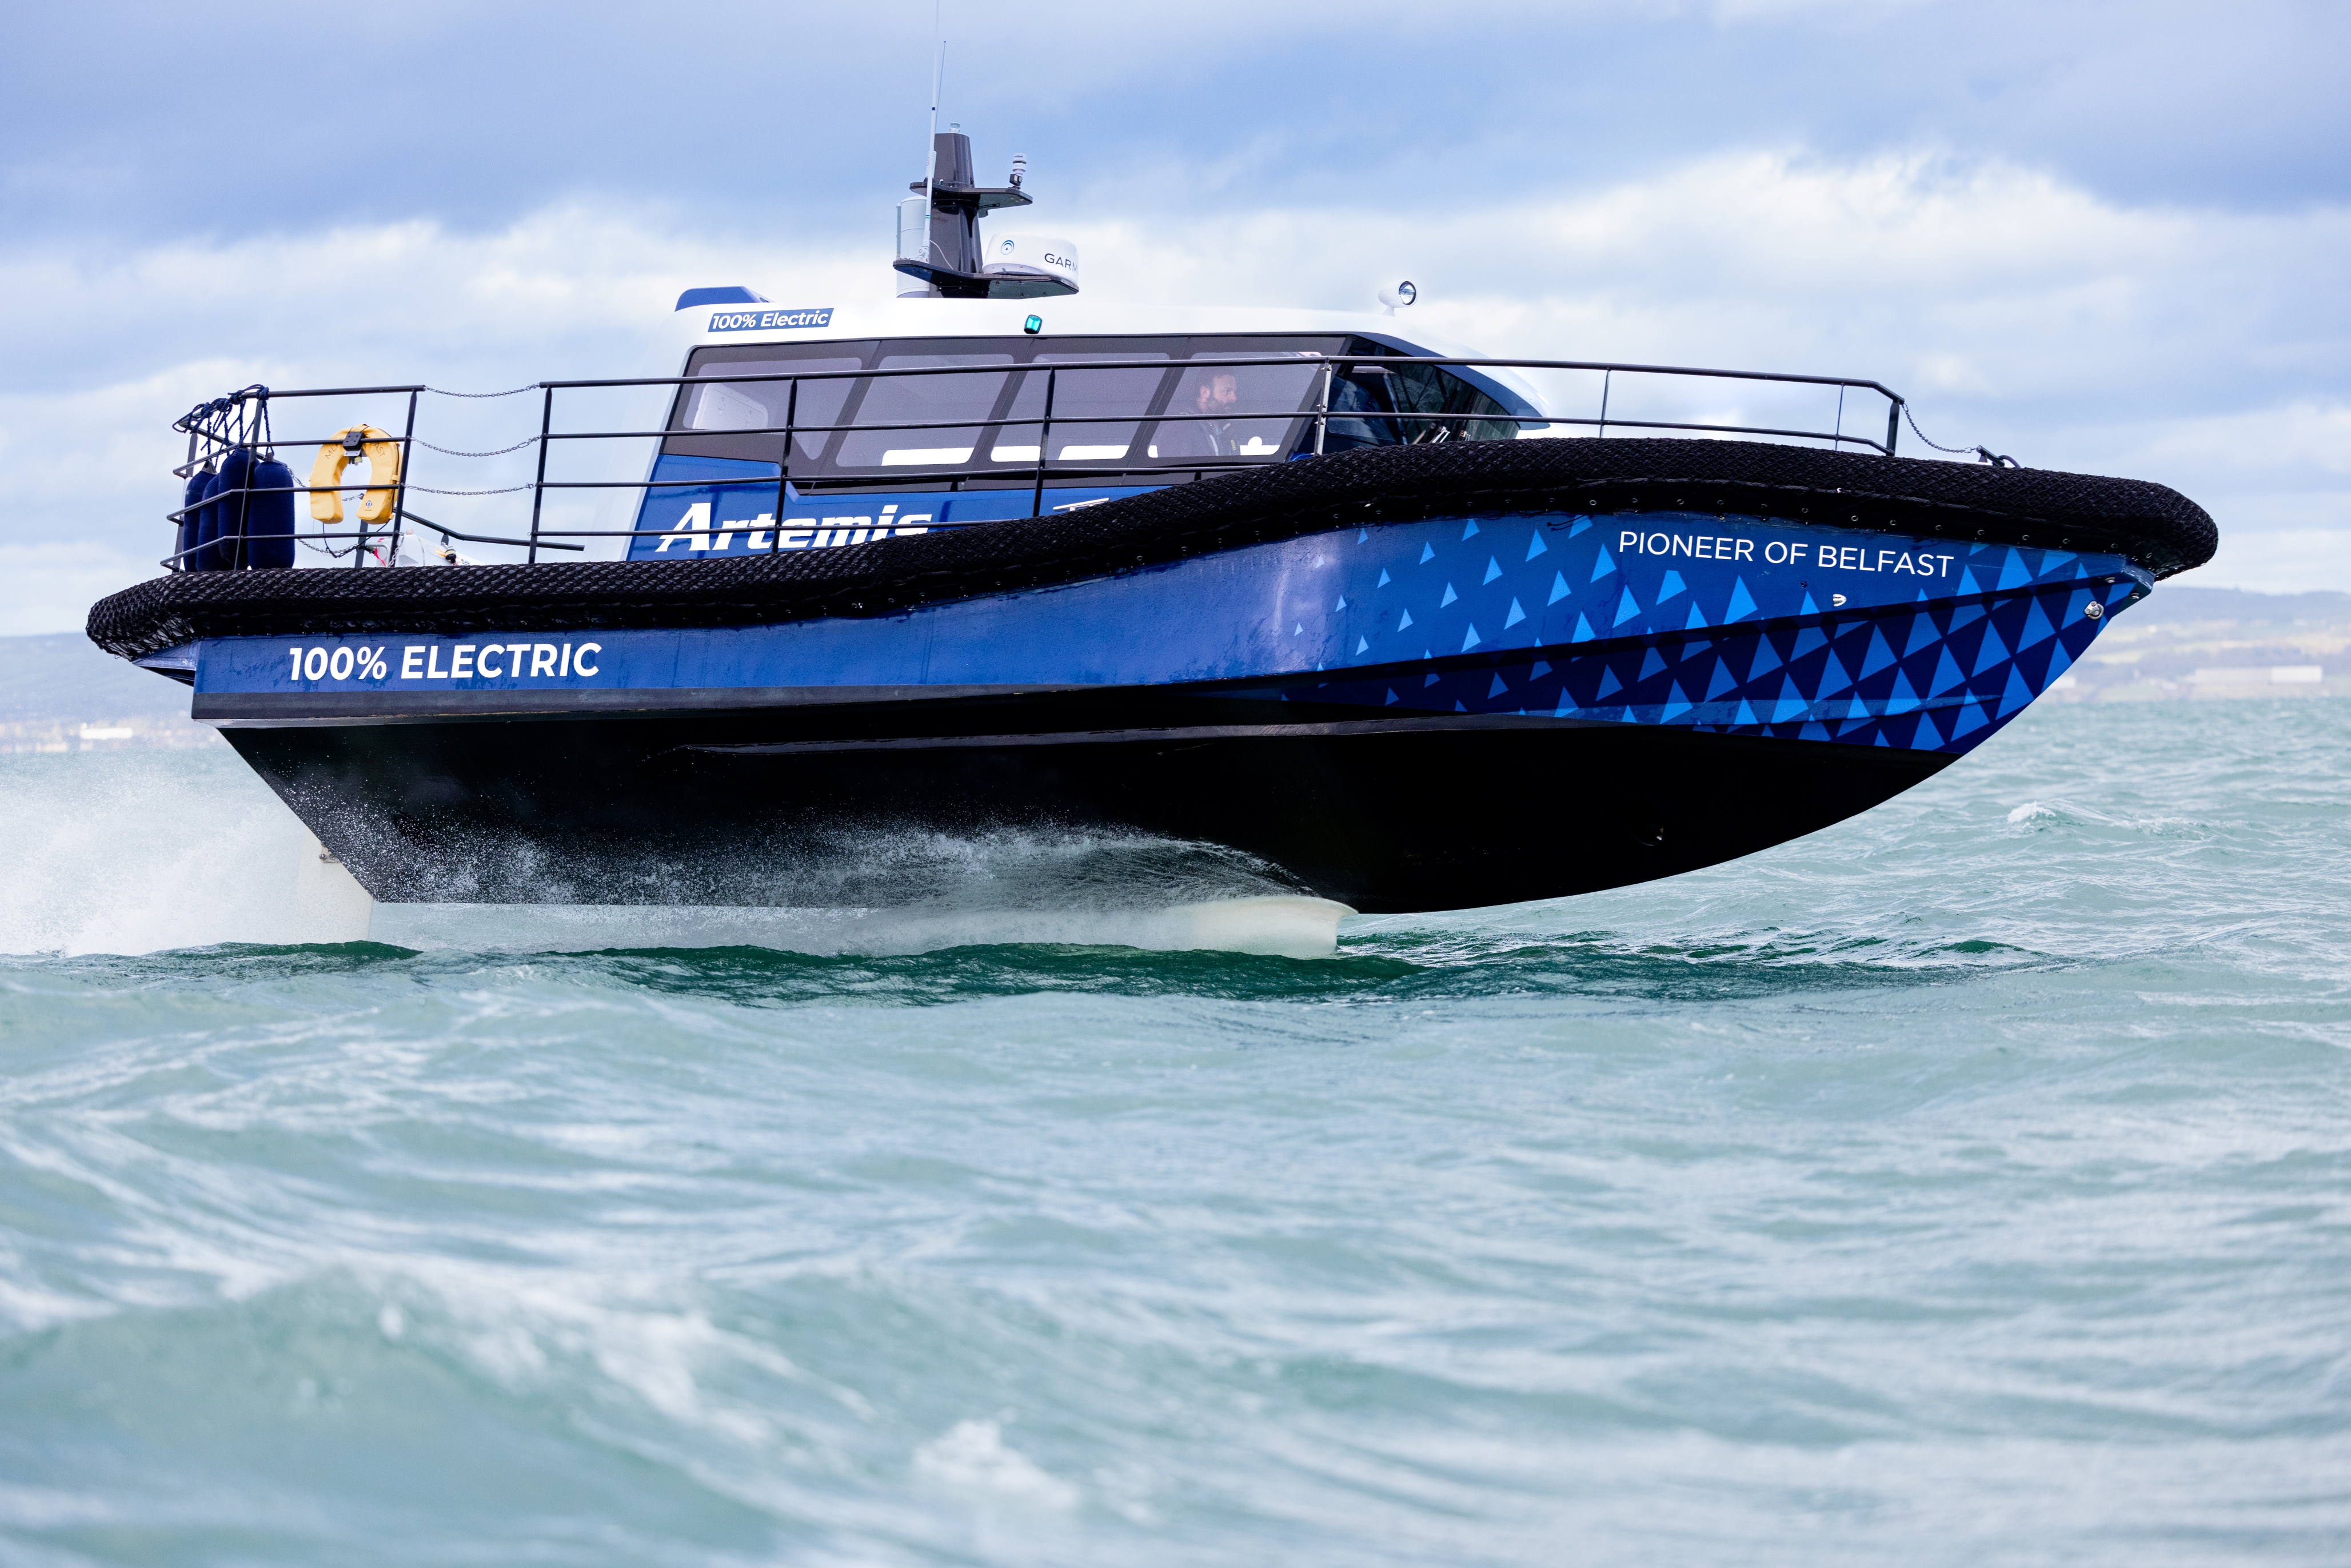 Close up of the Artemis EF-12 Workboat doing a turn while foiling